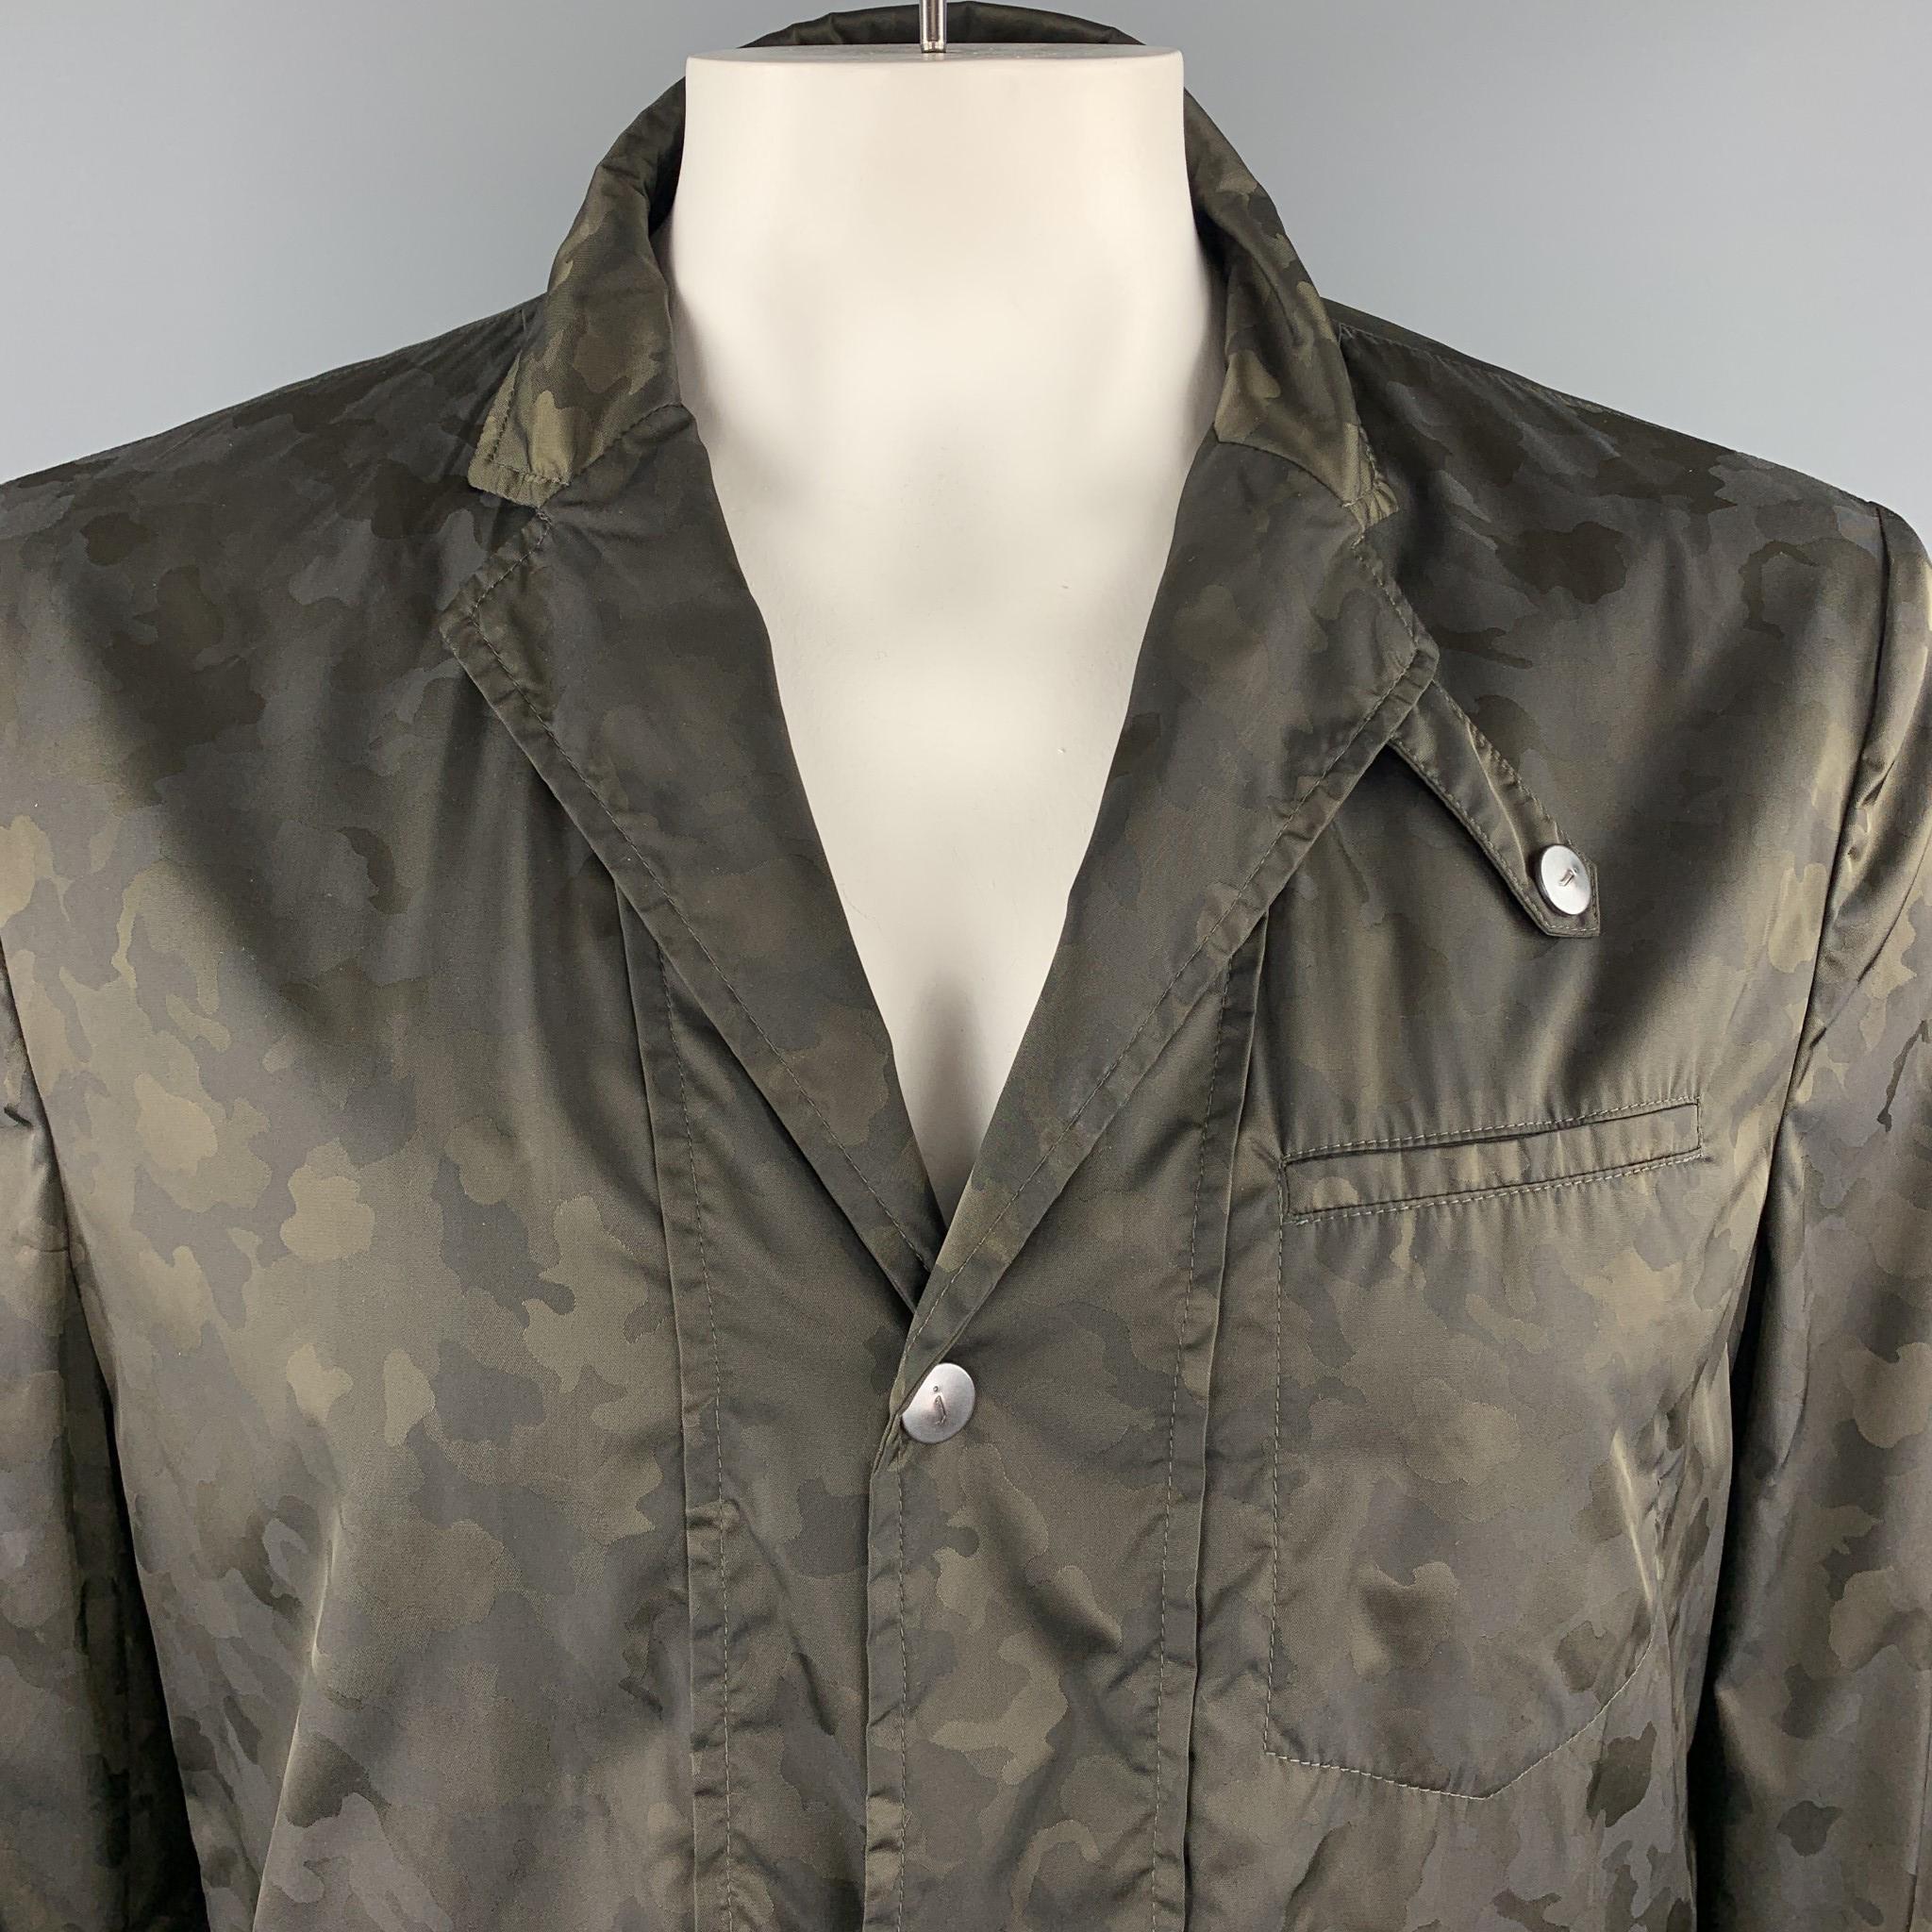 JOHN VARVATOS sport coat comes in olive green camouflage windbreaker fabric with a notch lapel, single breasted,  snap closure front, and zip and flap pockets. Made in Italy.

Excellent Pre-Owned Condition.
Marked: IT 52

Measurements:

Shoulder: 18